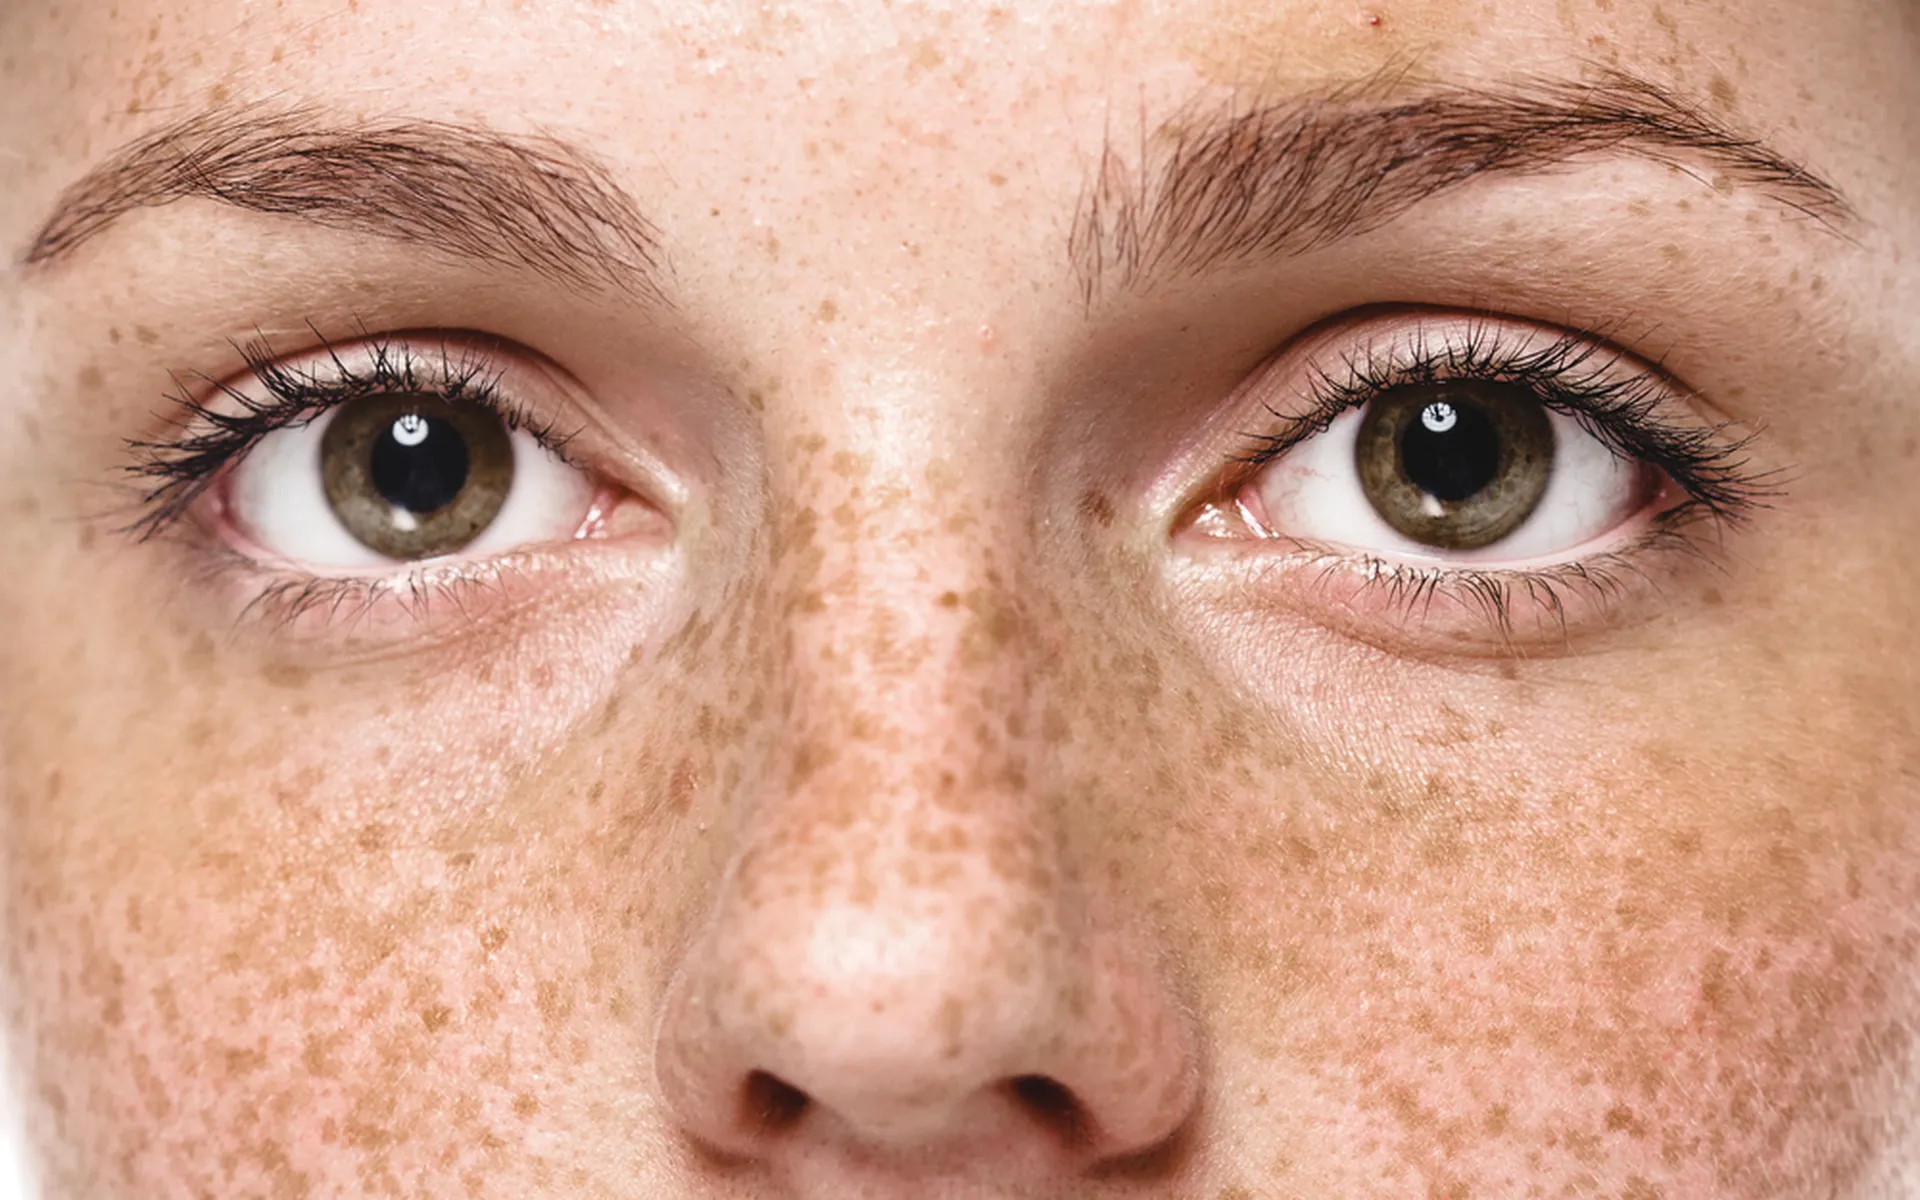 Why Do People Have Freckles?